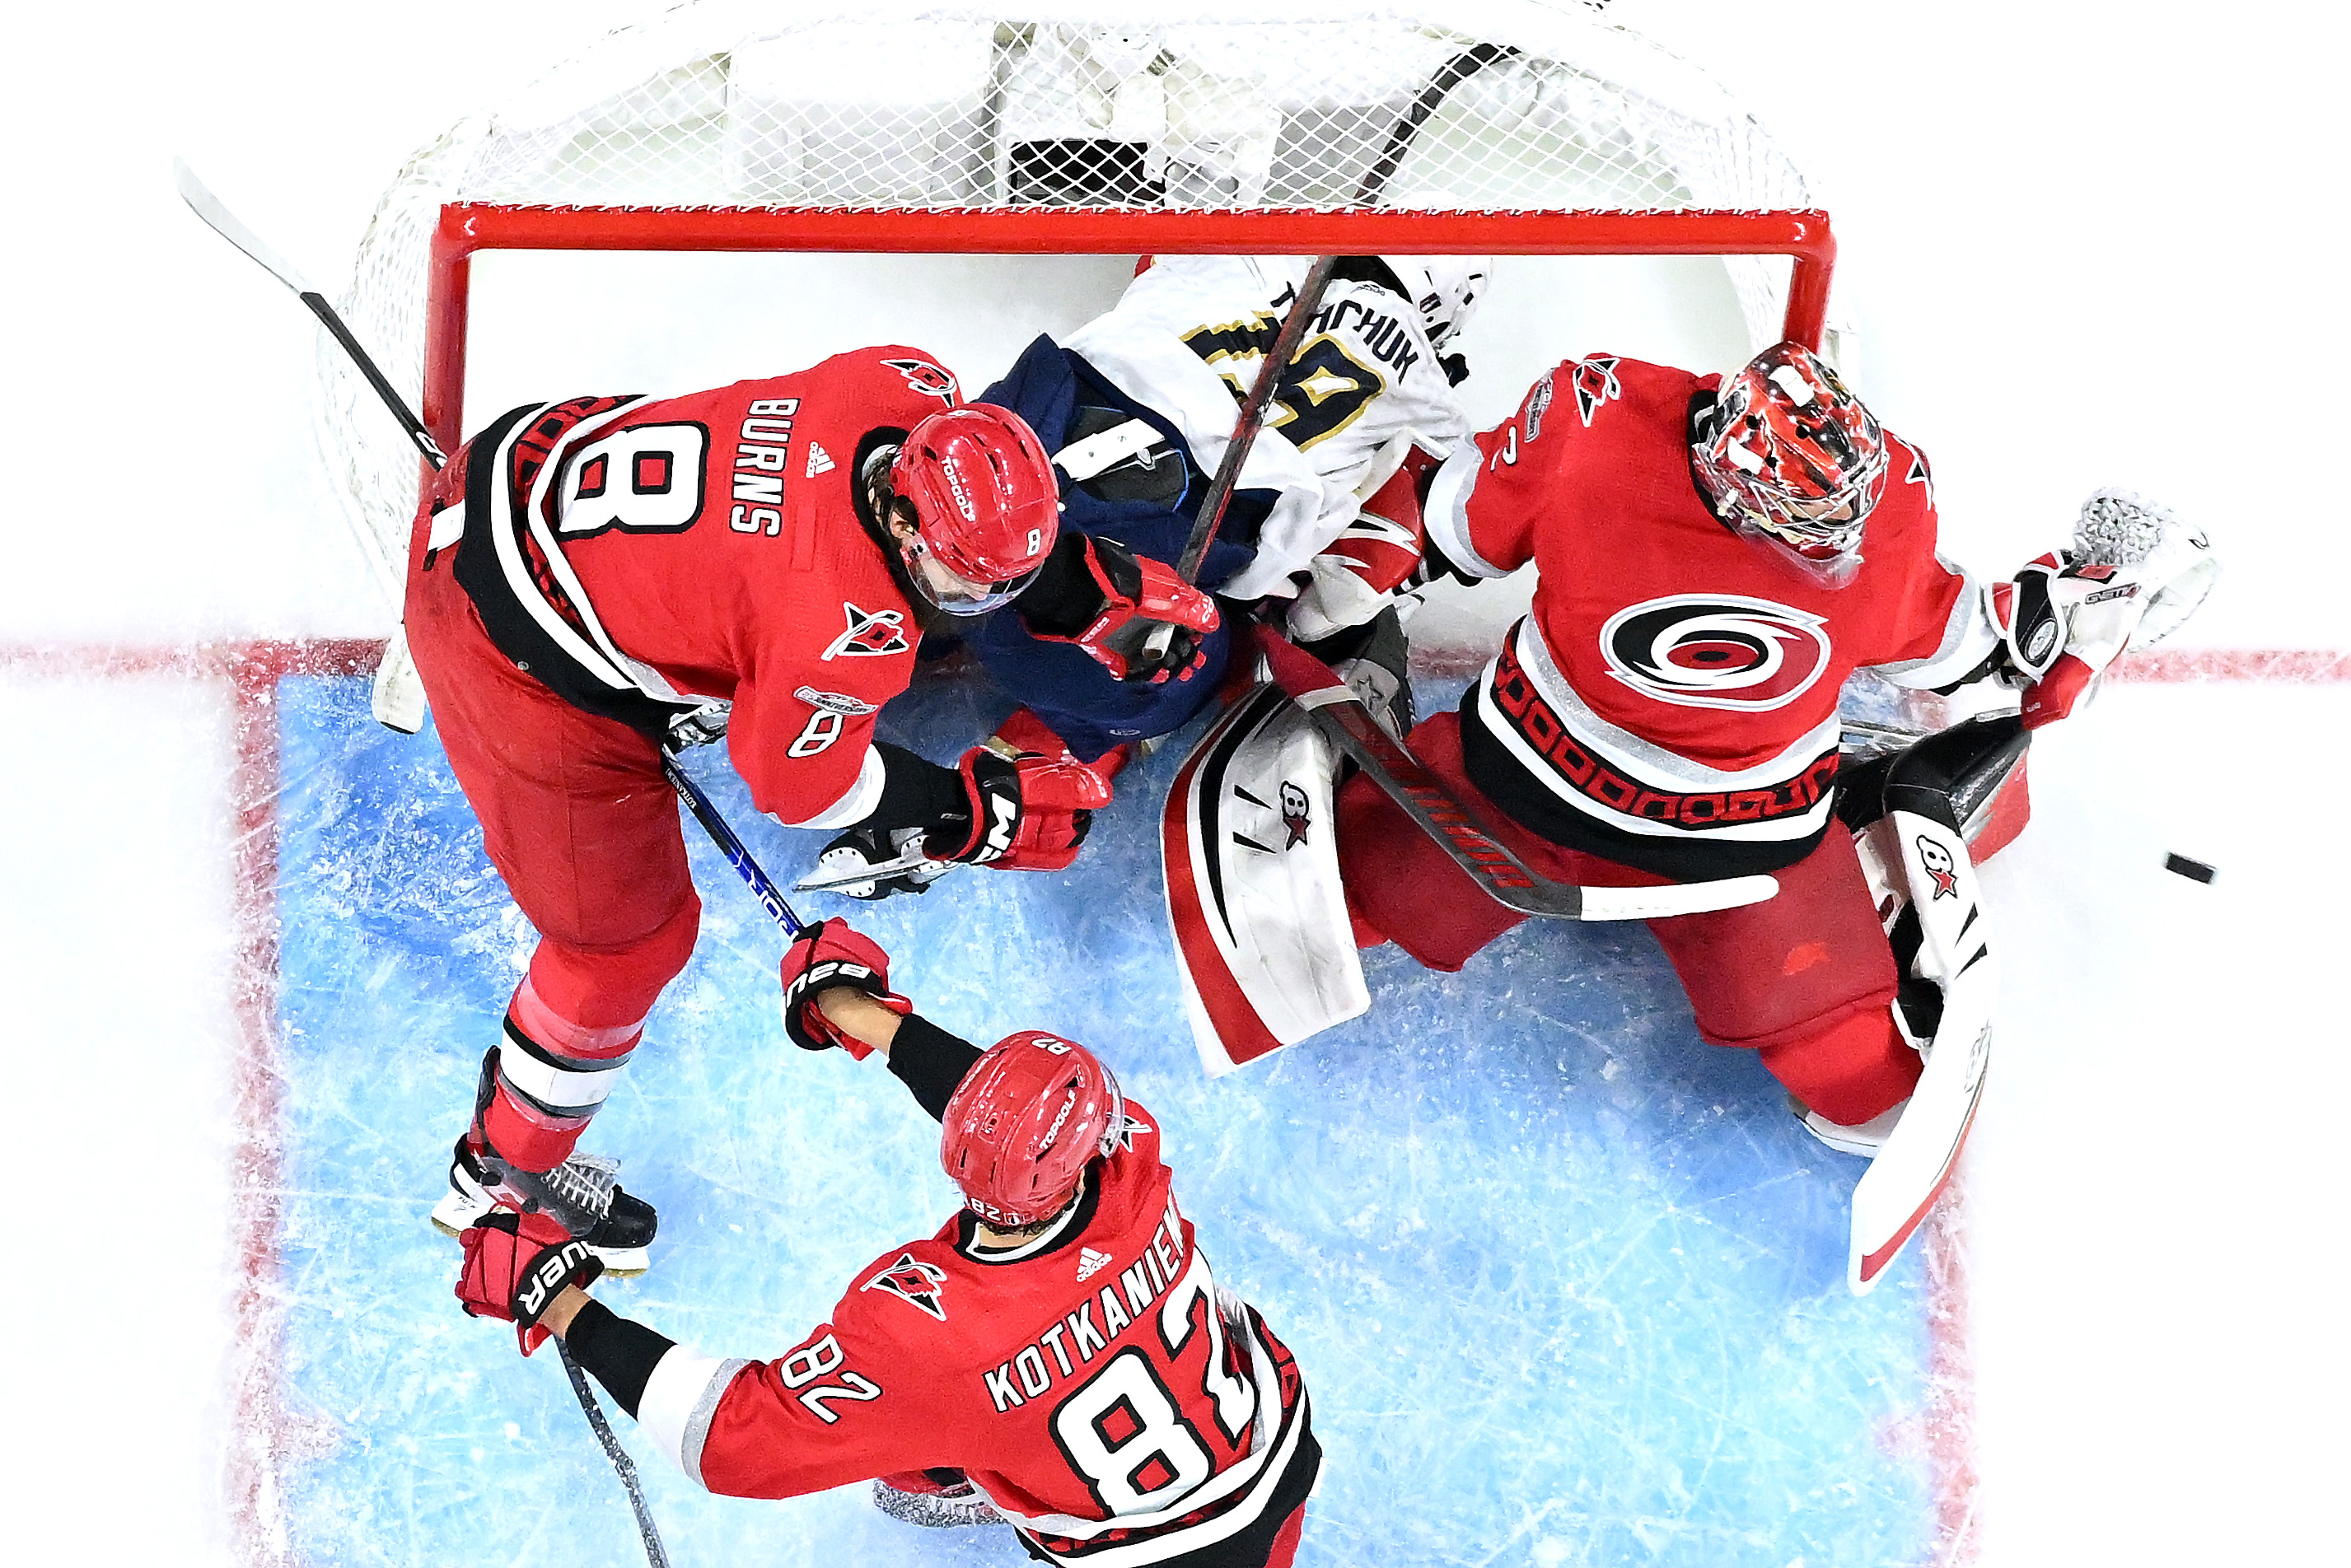 Antti Raanta of the Carolina Hurricanes deflects a shot as Matthew Tkachuk of the Florida Panthers crashes into the net during Game Two of the Eastern Conference Finals of the 2023 Stanley Cup Playoffs at PNC Arena on May 20, 2023 in Raleigh, North Carolina.